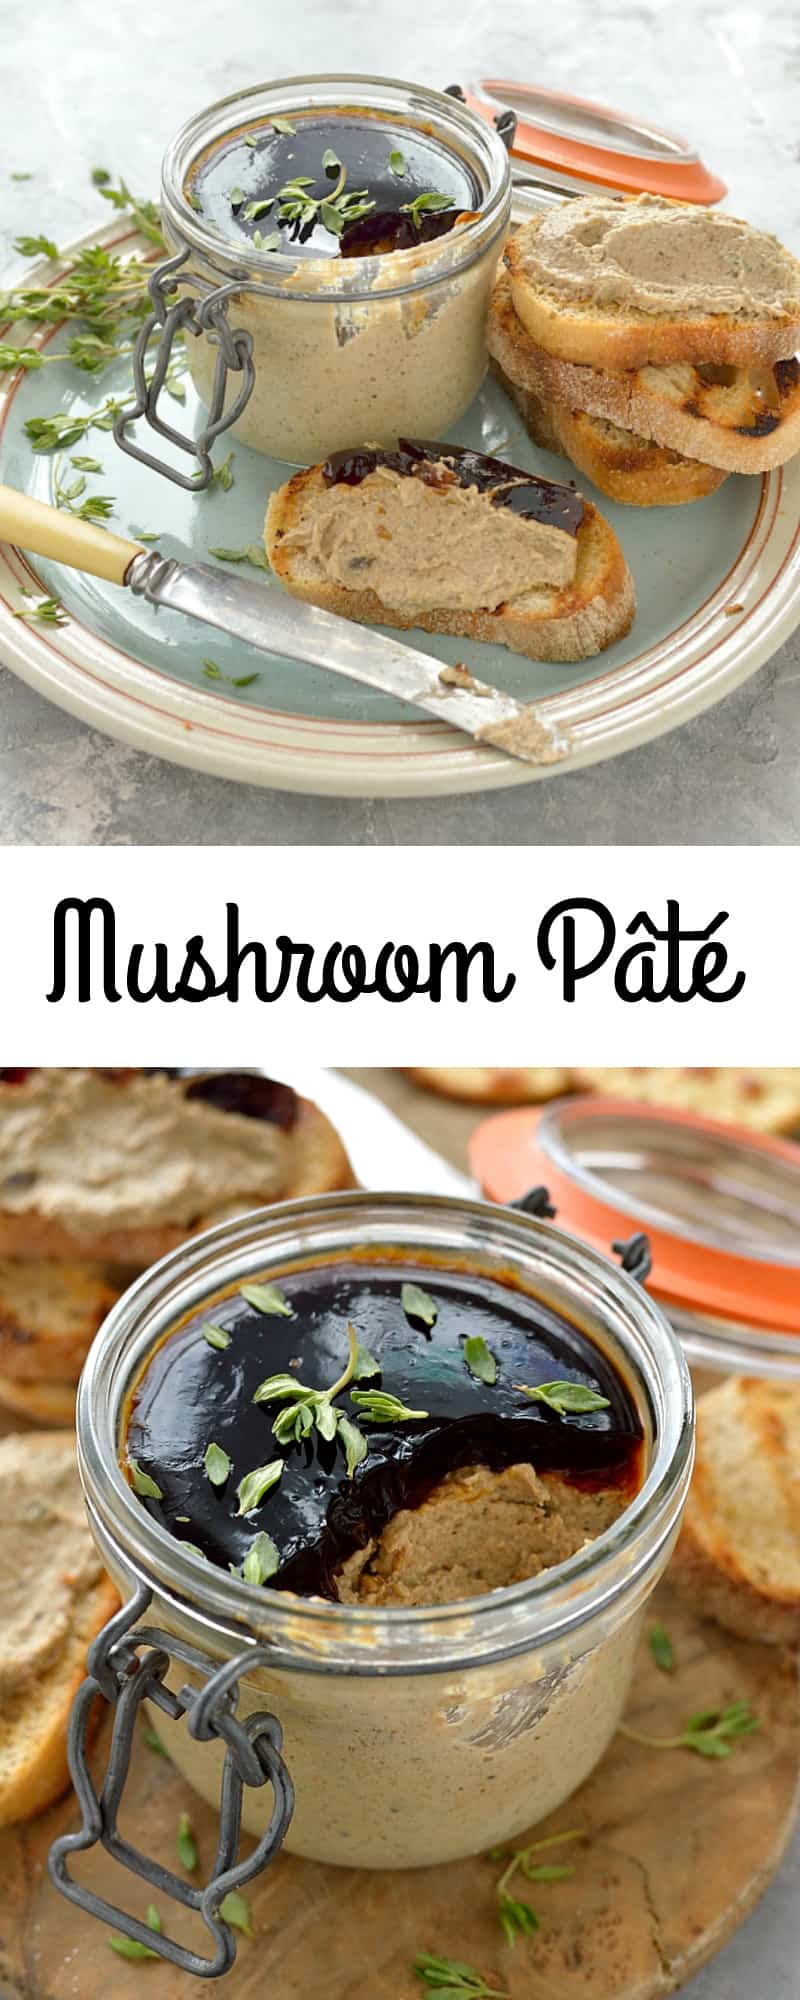 Mushroom pâté - a tasty vegetarian mushroom pâté made with dried porcini mushrooms for extra flavour. Great as a starter, canape or sandwich filling.